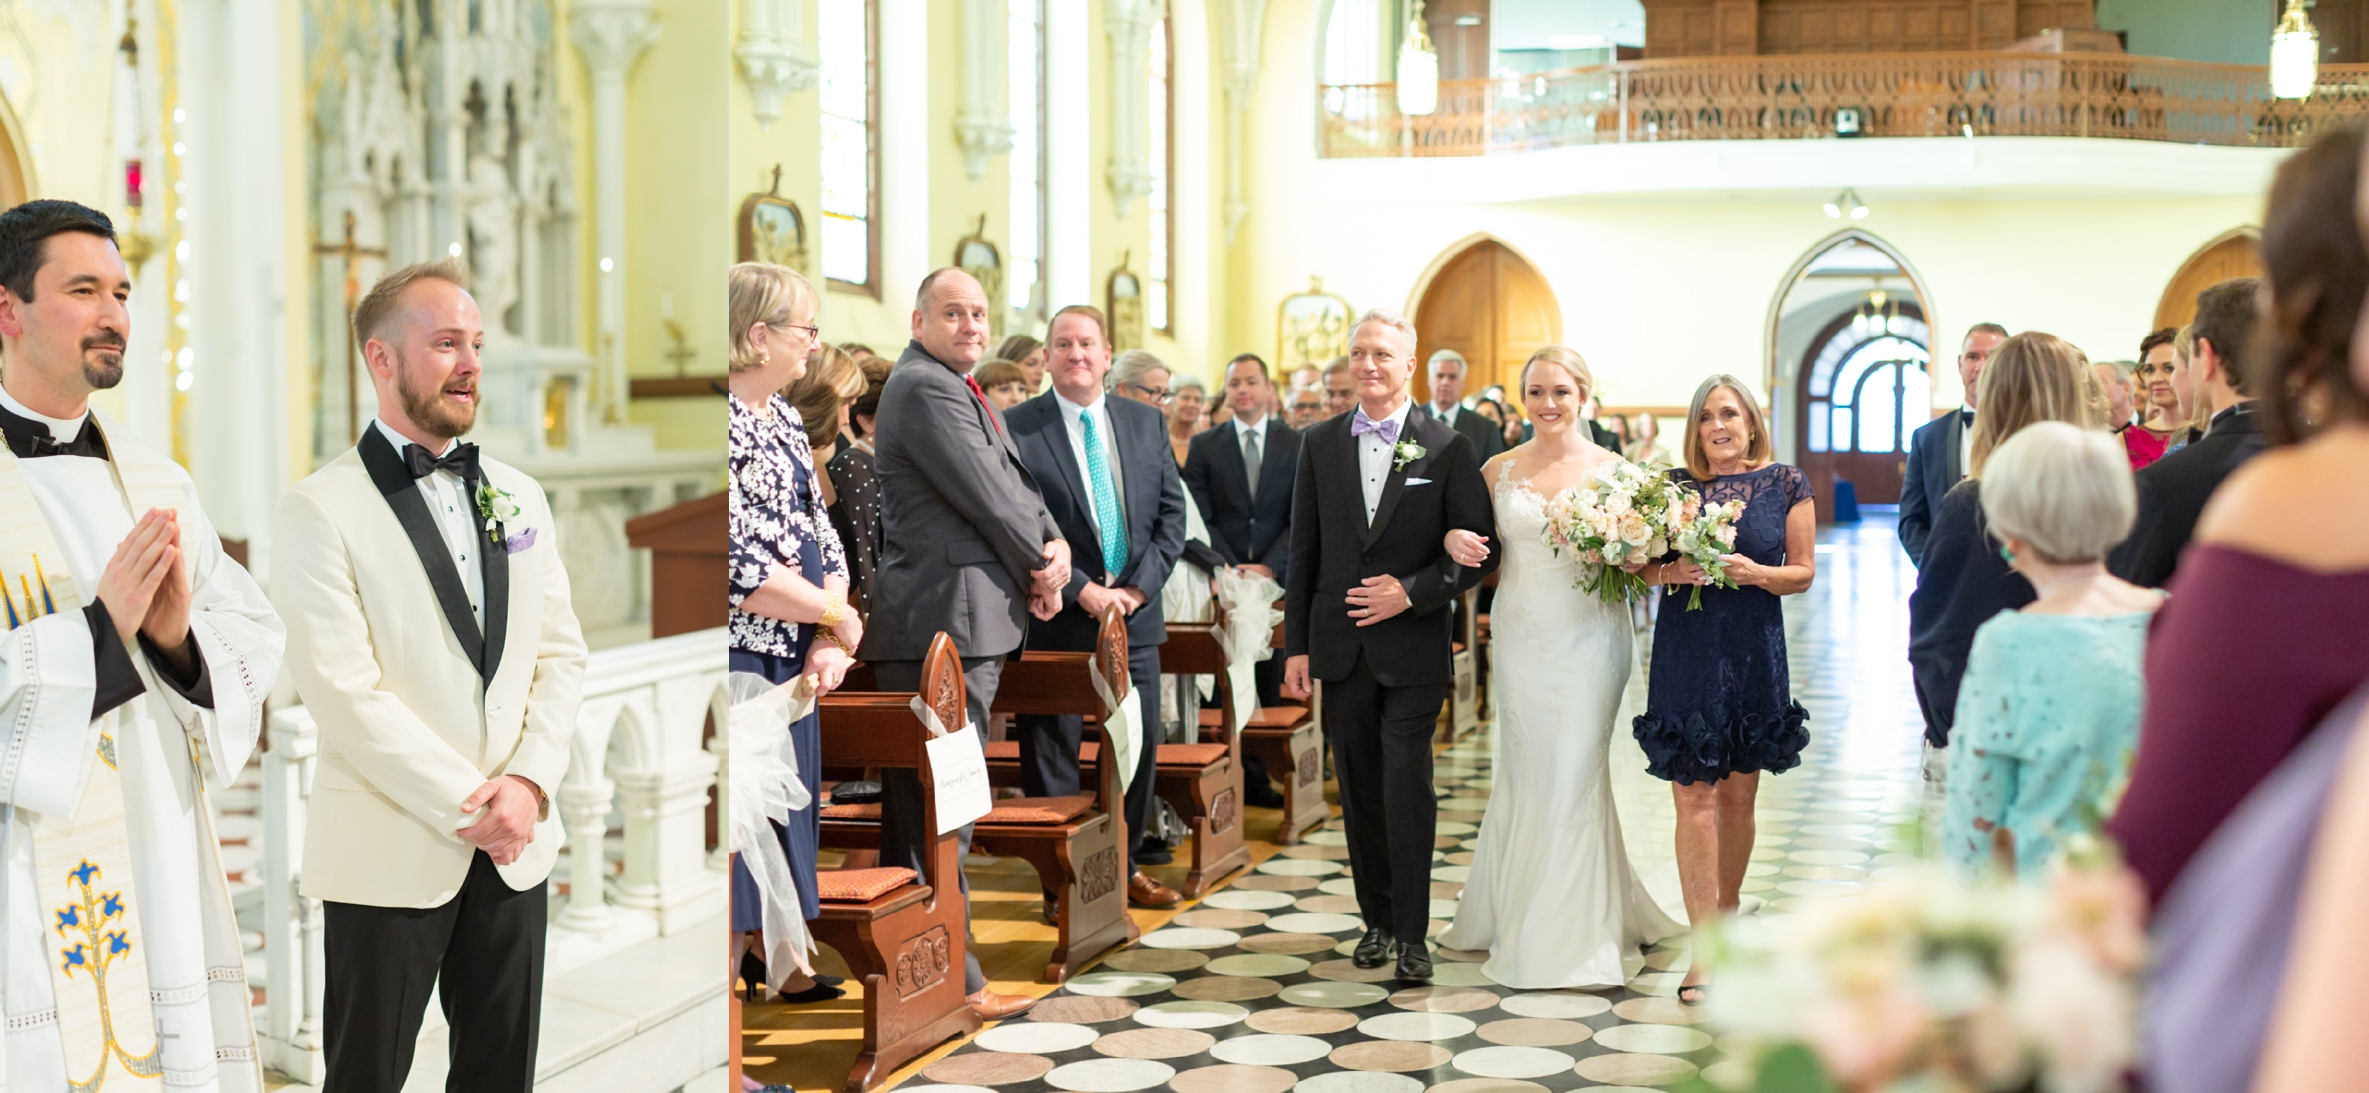 Summit Country Day Wedding, Immaculate Heart of Mary Chapel, Wedding Grooms face when Bride walks down aisle